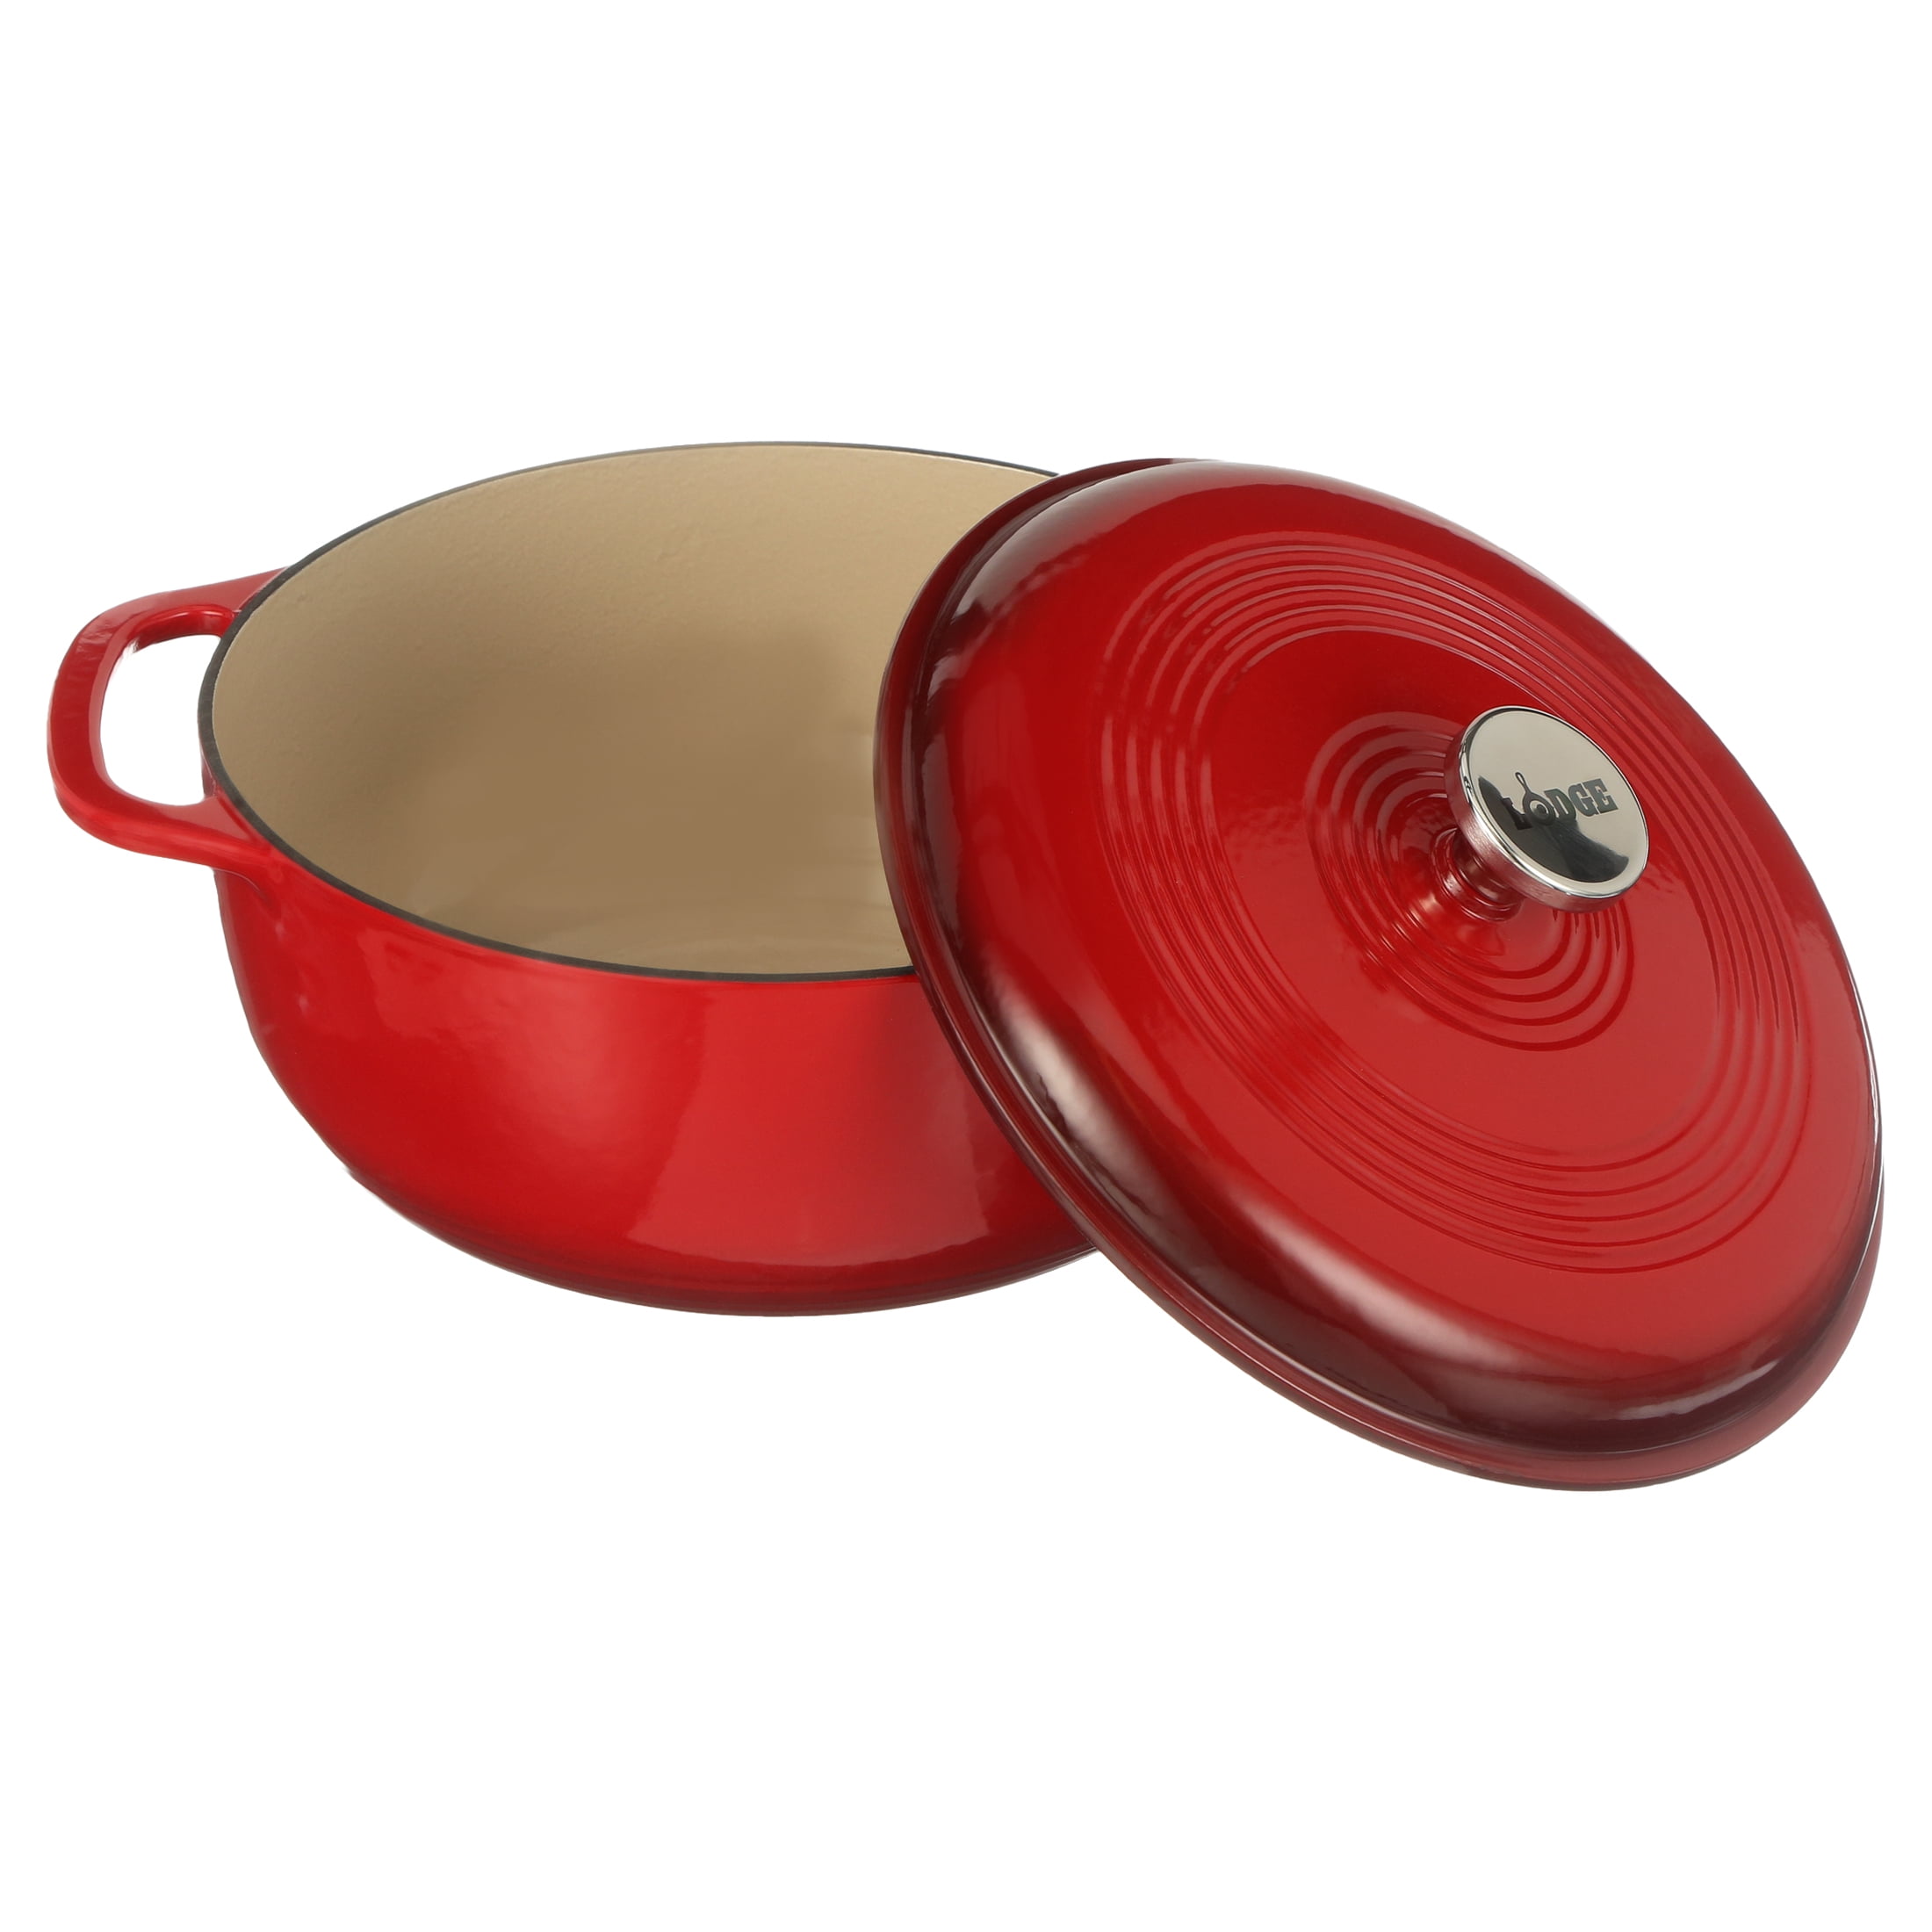 Lodge Enamelware 6 qt. Round Cast Iron Dutch Oven in Red with Lid EC6D43 -  The Home Depot